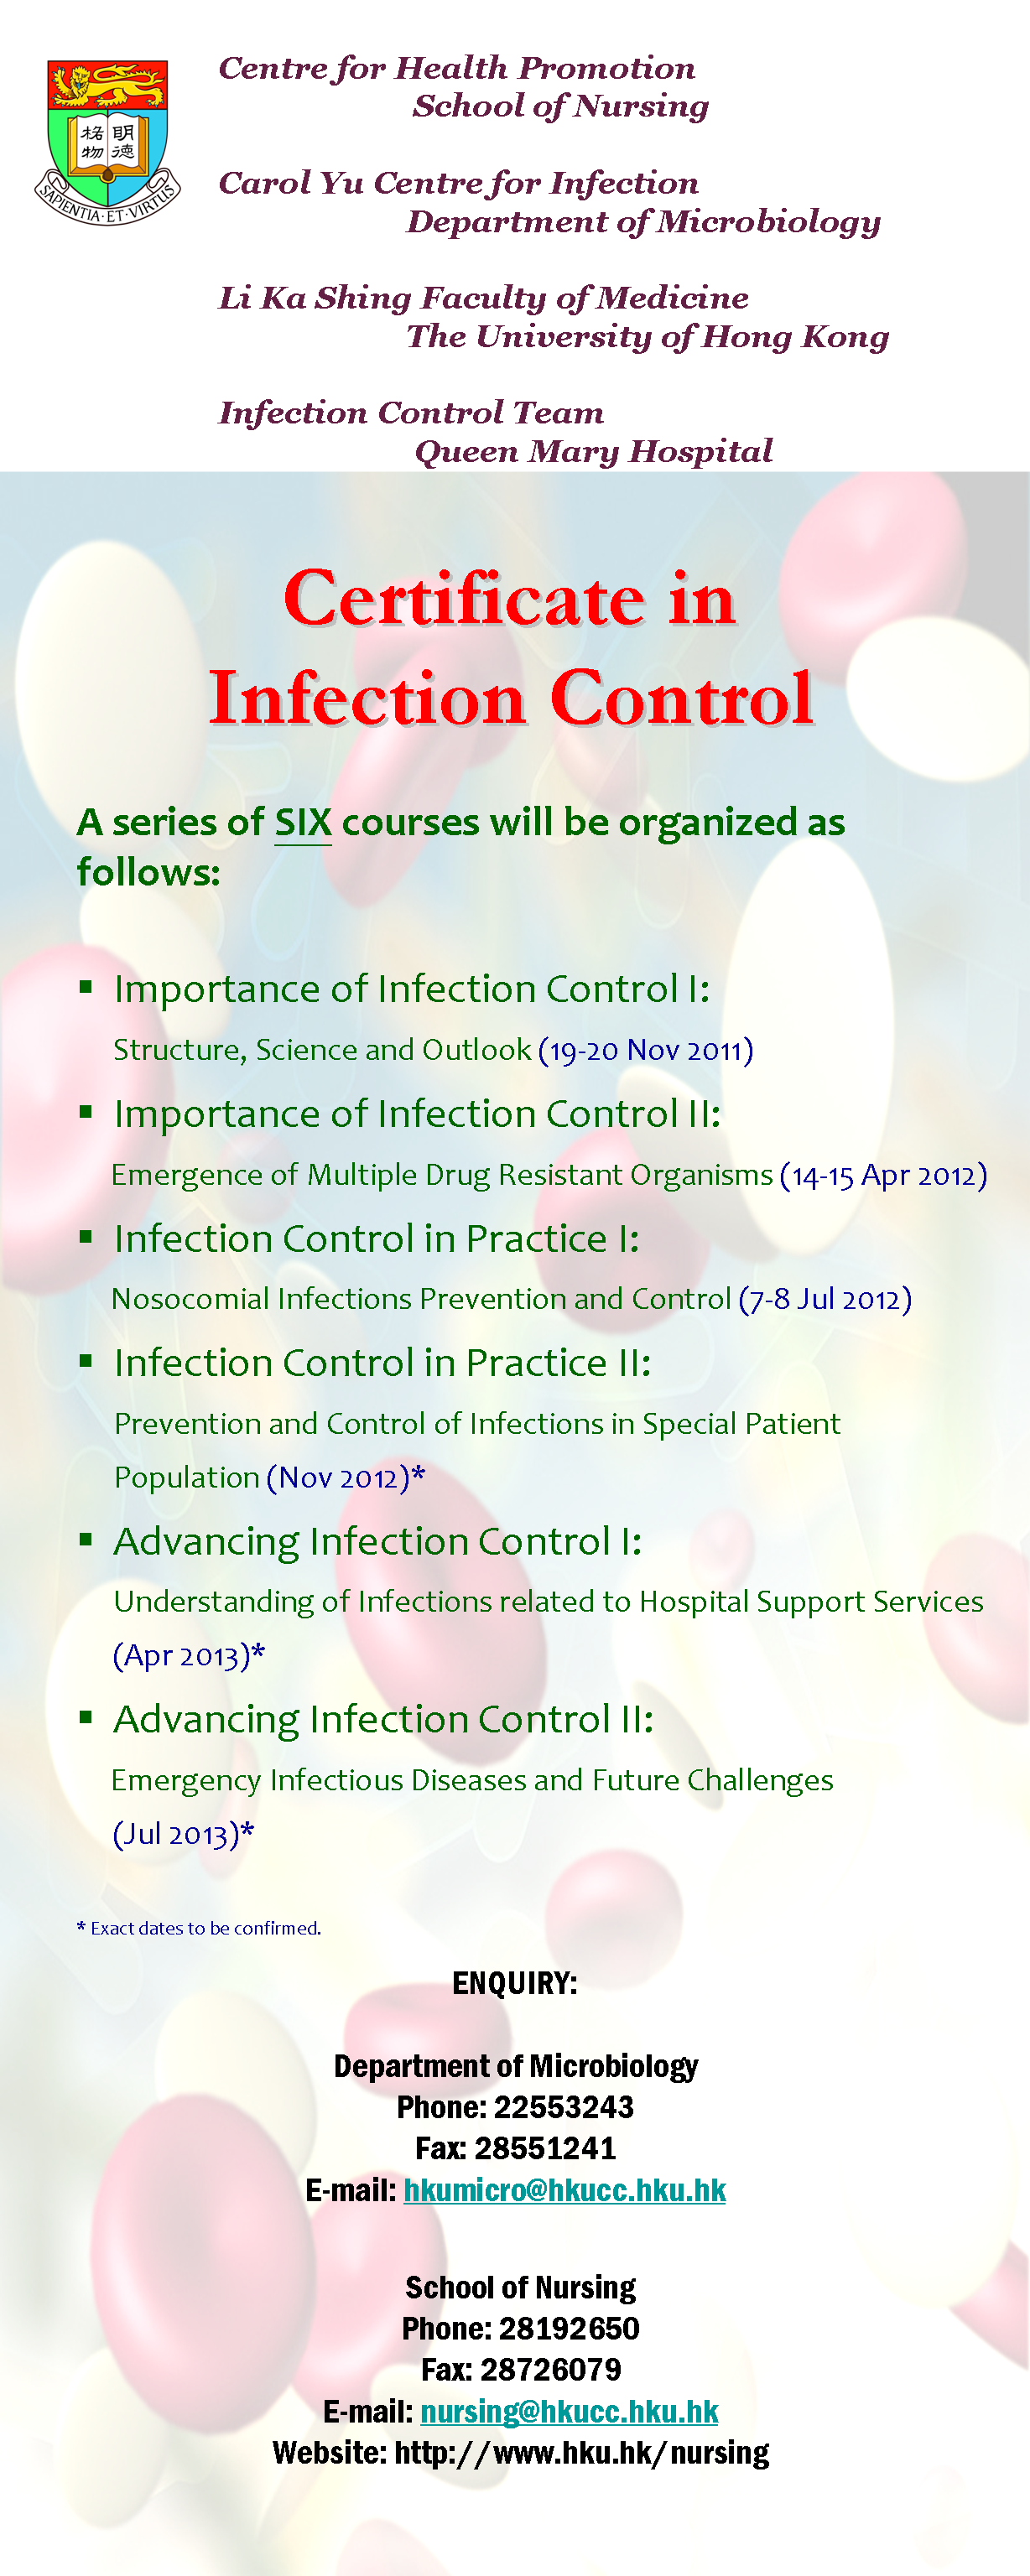 Infection Control Course (2011-2013) Module 2 to be held on 14-15 Apr 2012